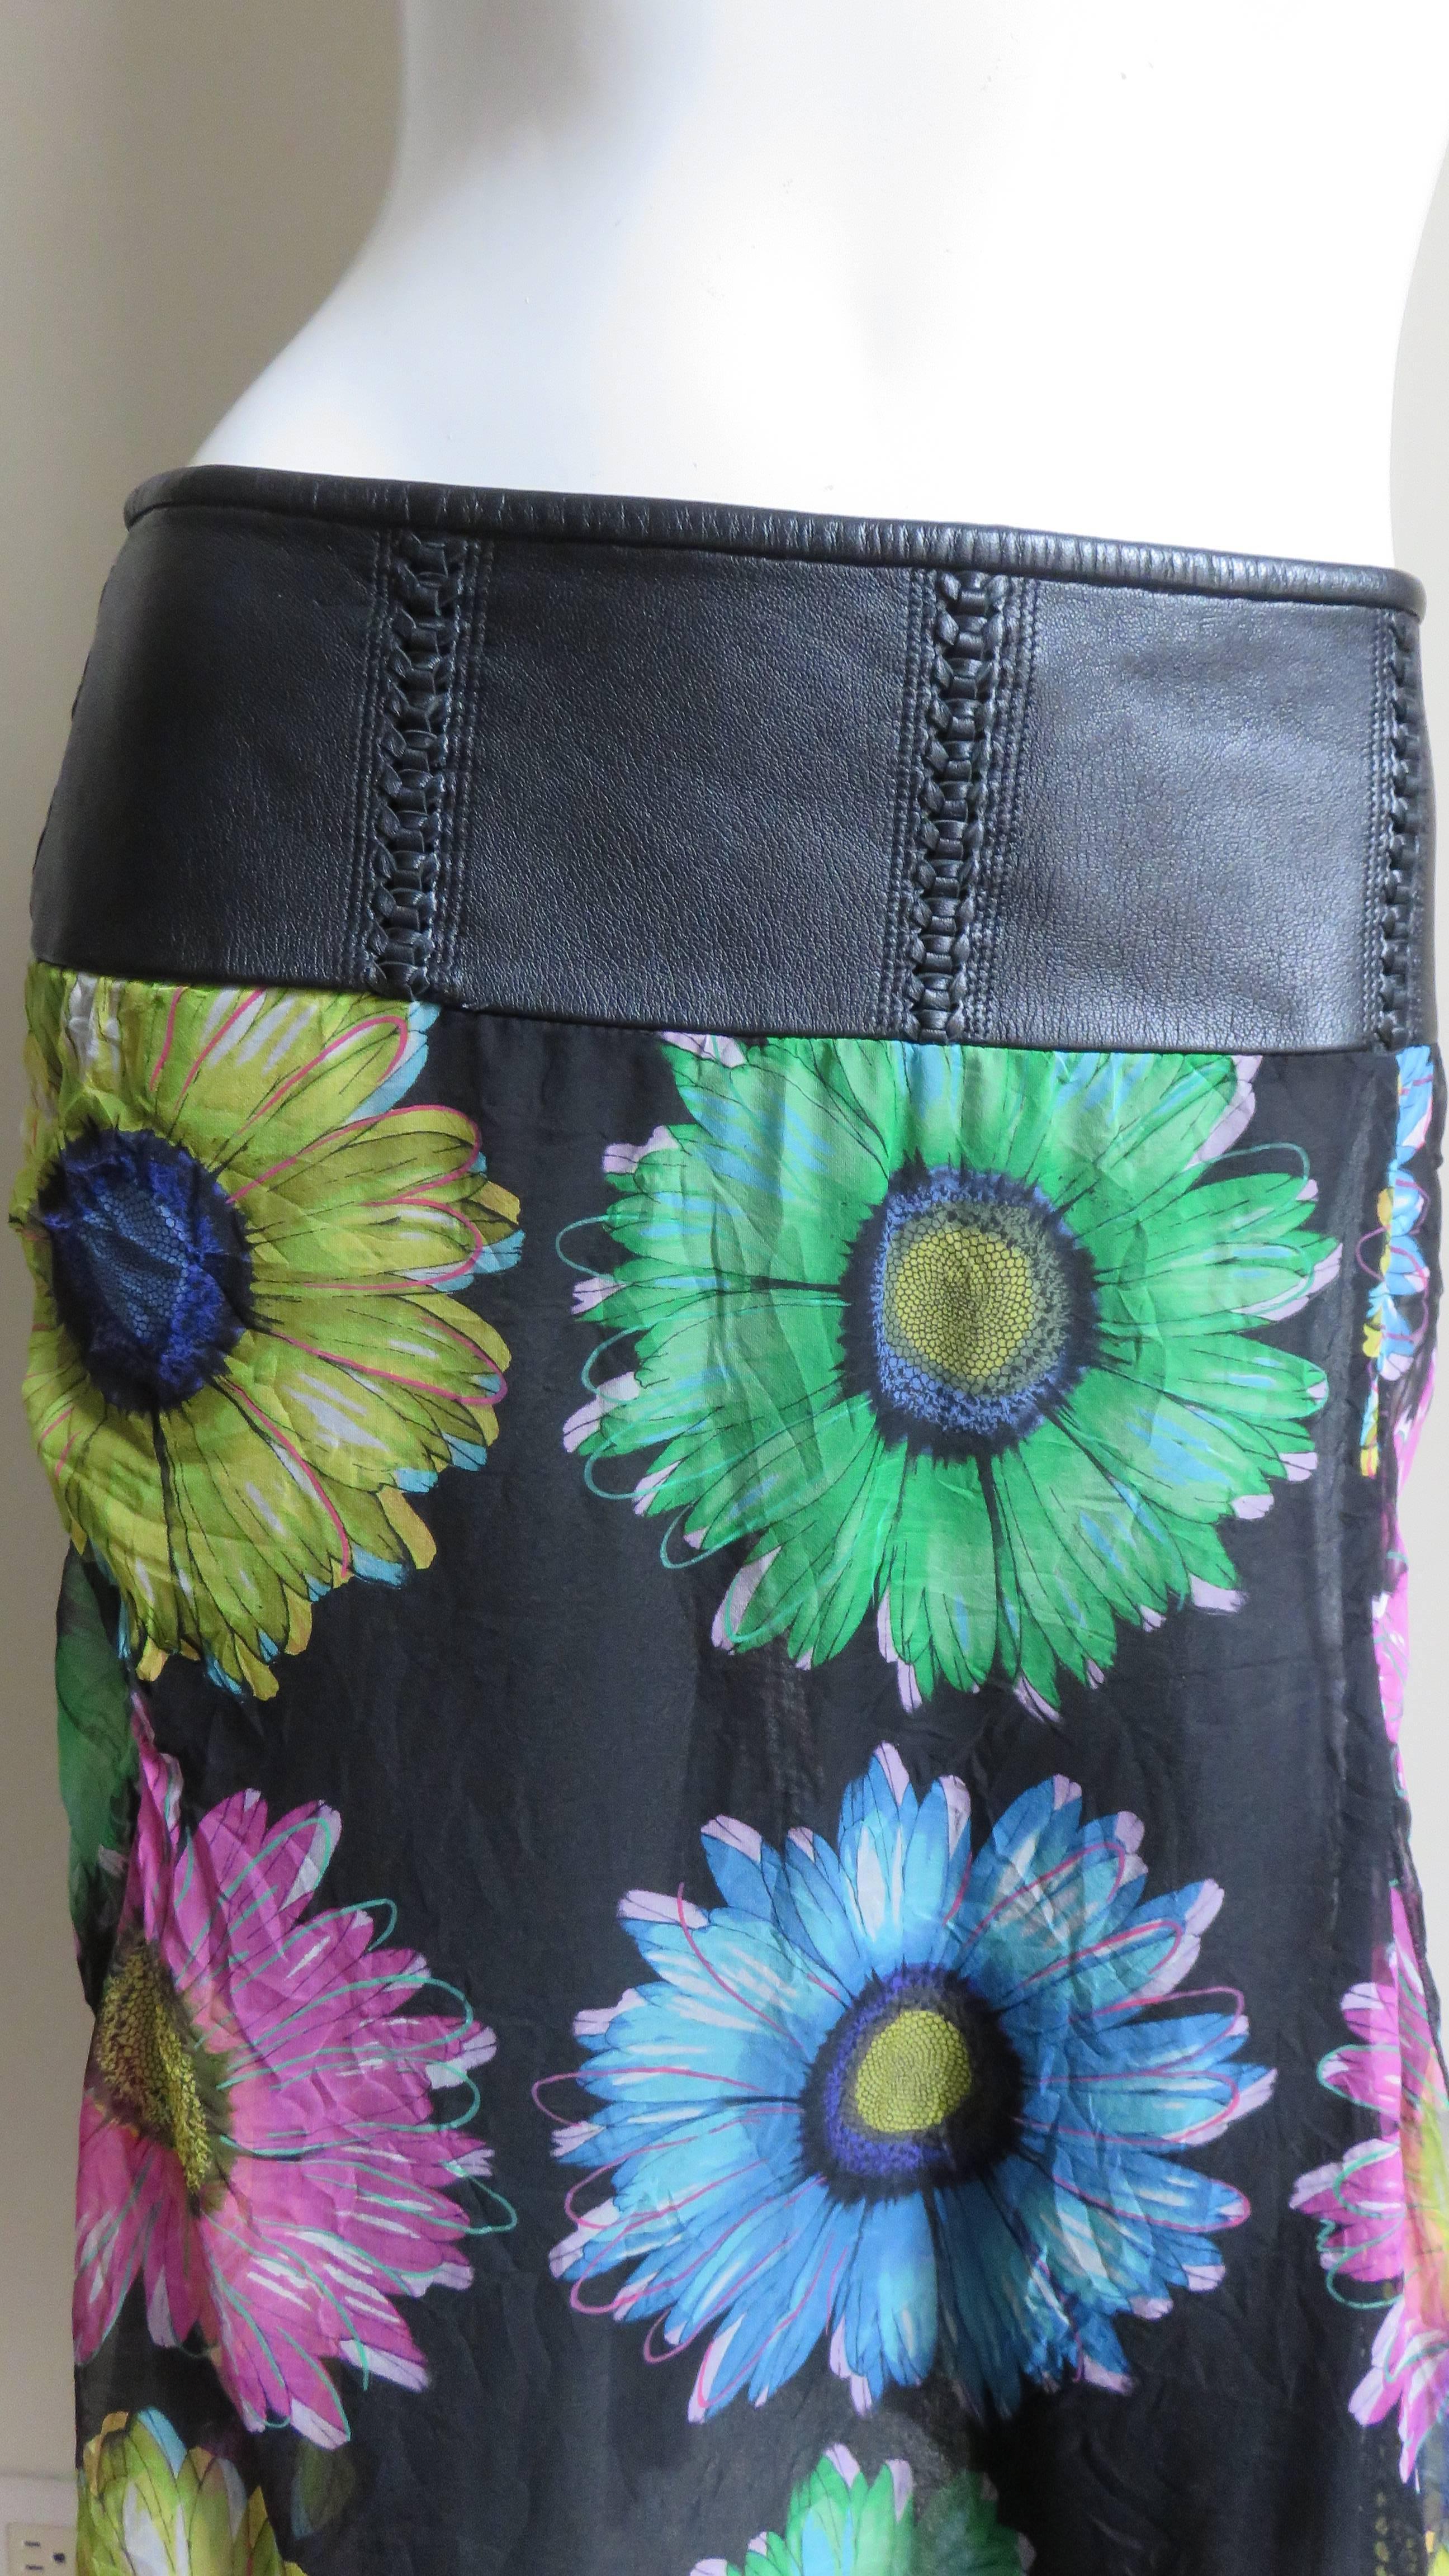 Gianni Versace Silk Skirt with Leather Band 1990s In Excellent Condition For Sale In Water Mill, NY